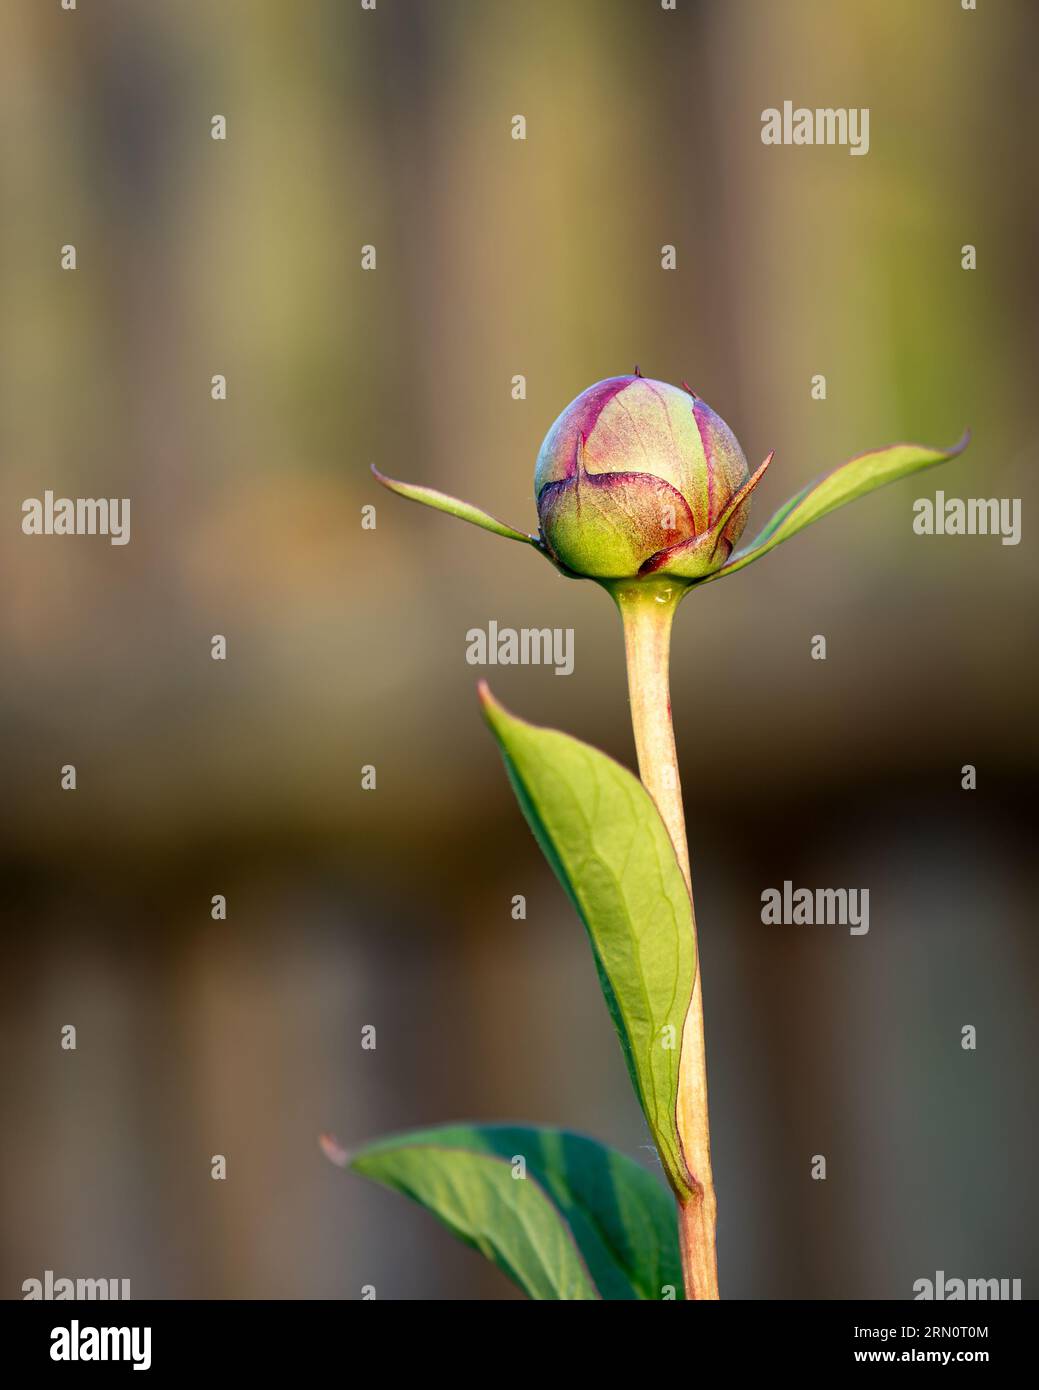 isolated flower bud illuminated by sunlight against blurred background, green, red, brown color with copy space Stock Photo